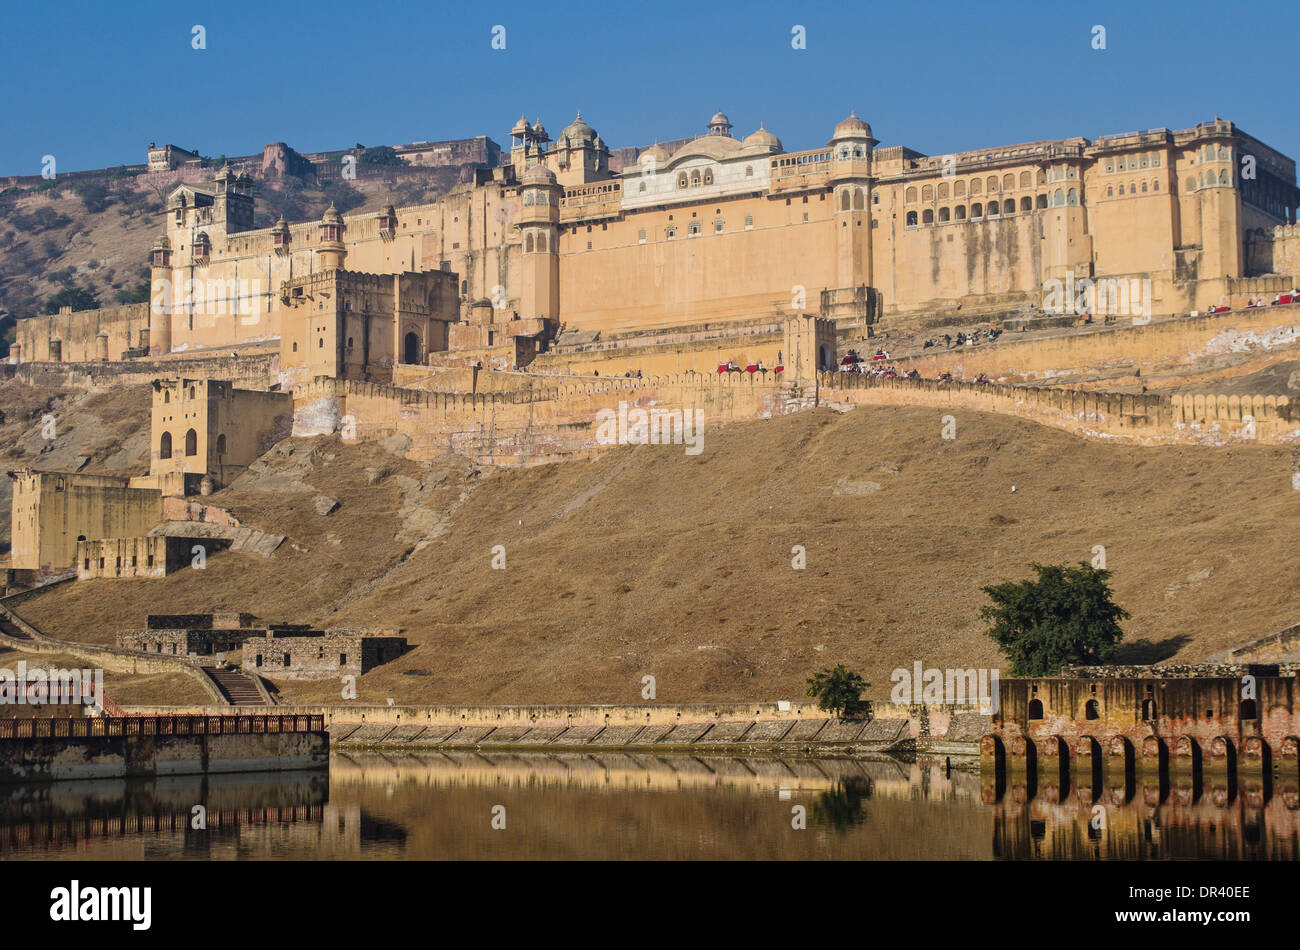 Amber Fort, a Jaipur, India Foto Stock